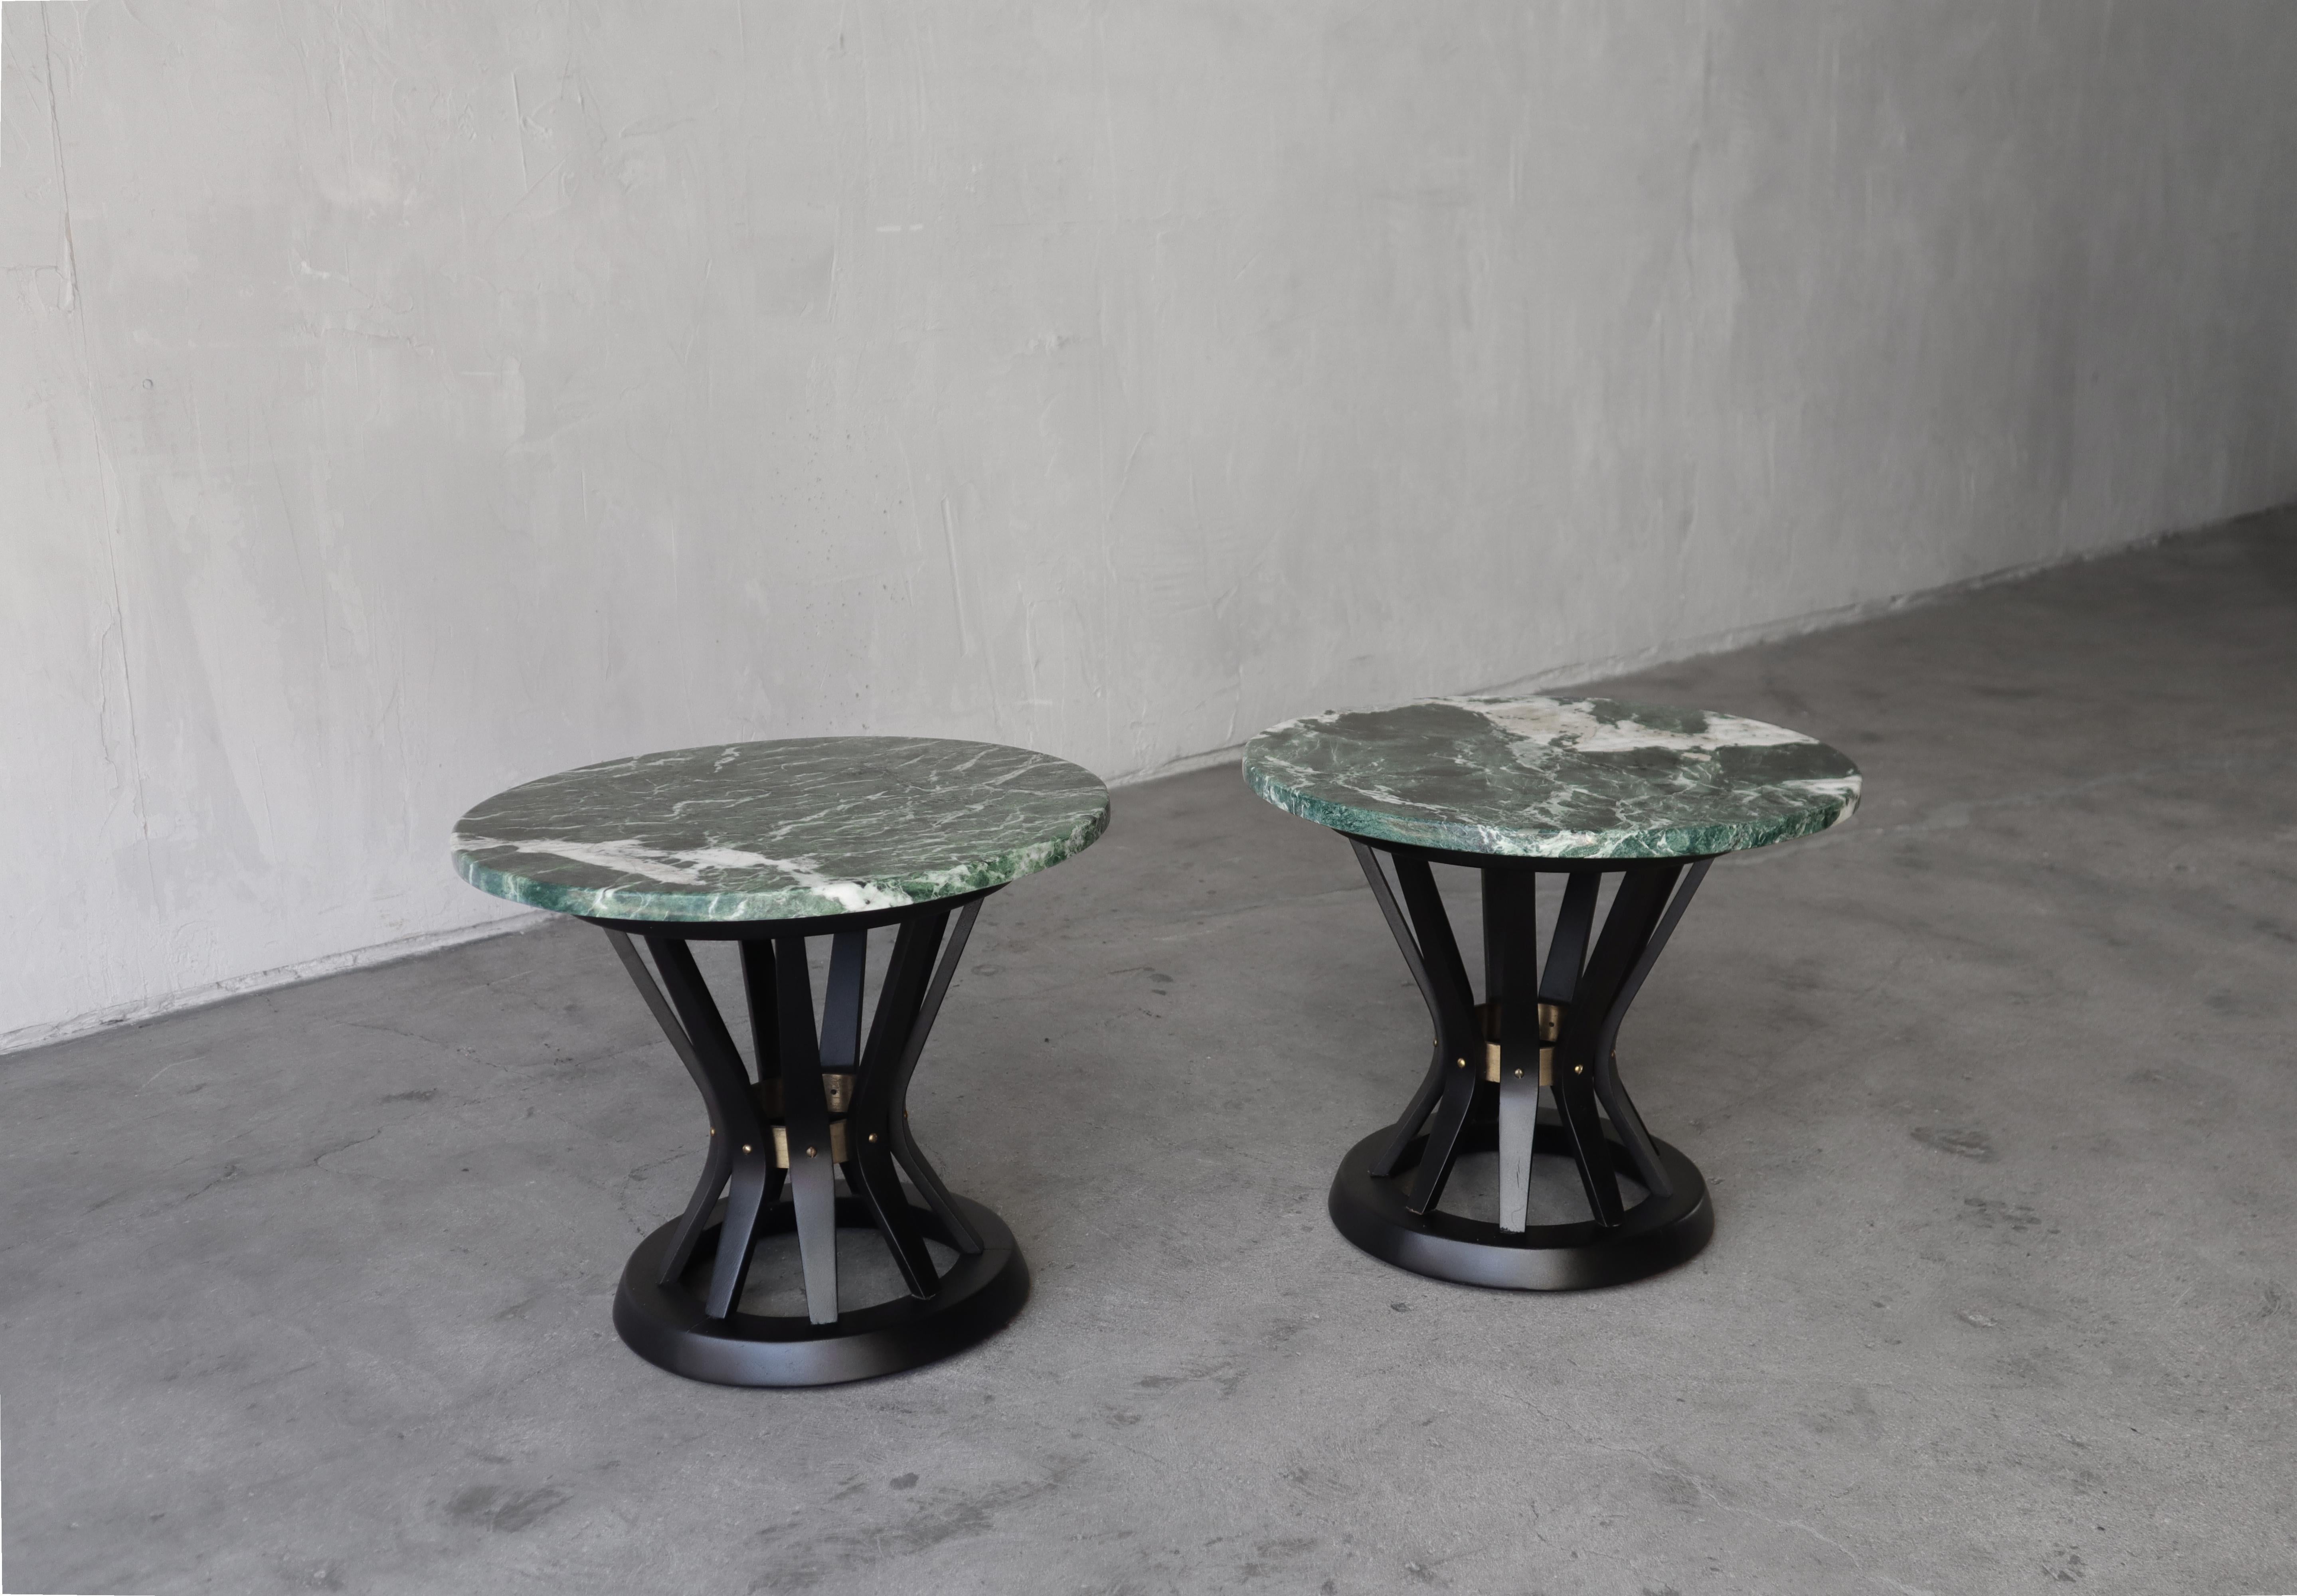 Gorgeous mid-century sheaf of wheat side tables with gorgeous Empress Green Marble tops and brass details, designed in the 1950's by Edward Wormley for Dunbar. 

Tables are in excellent condition with no imperfections to be noted. Installation ready.